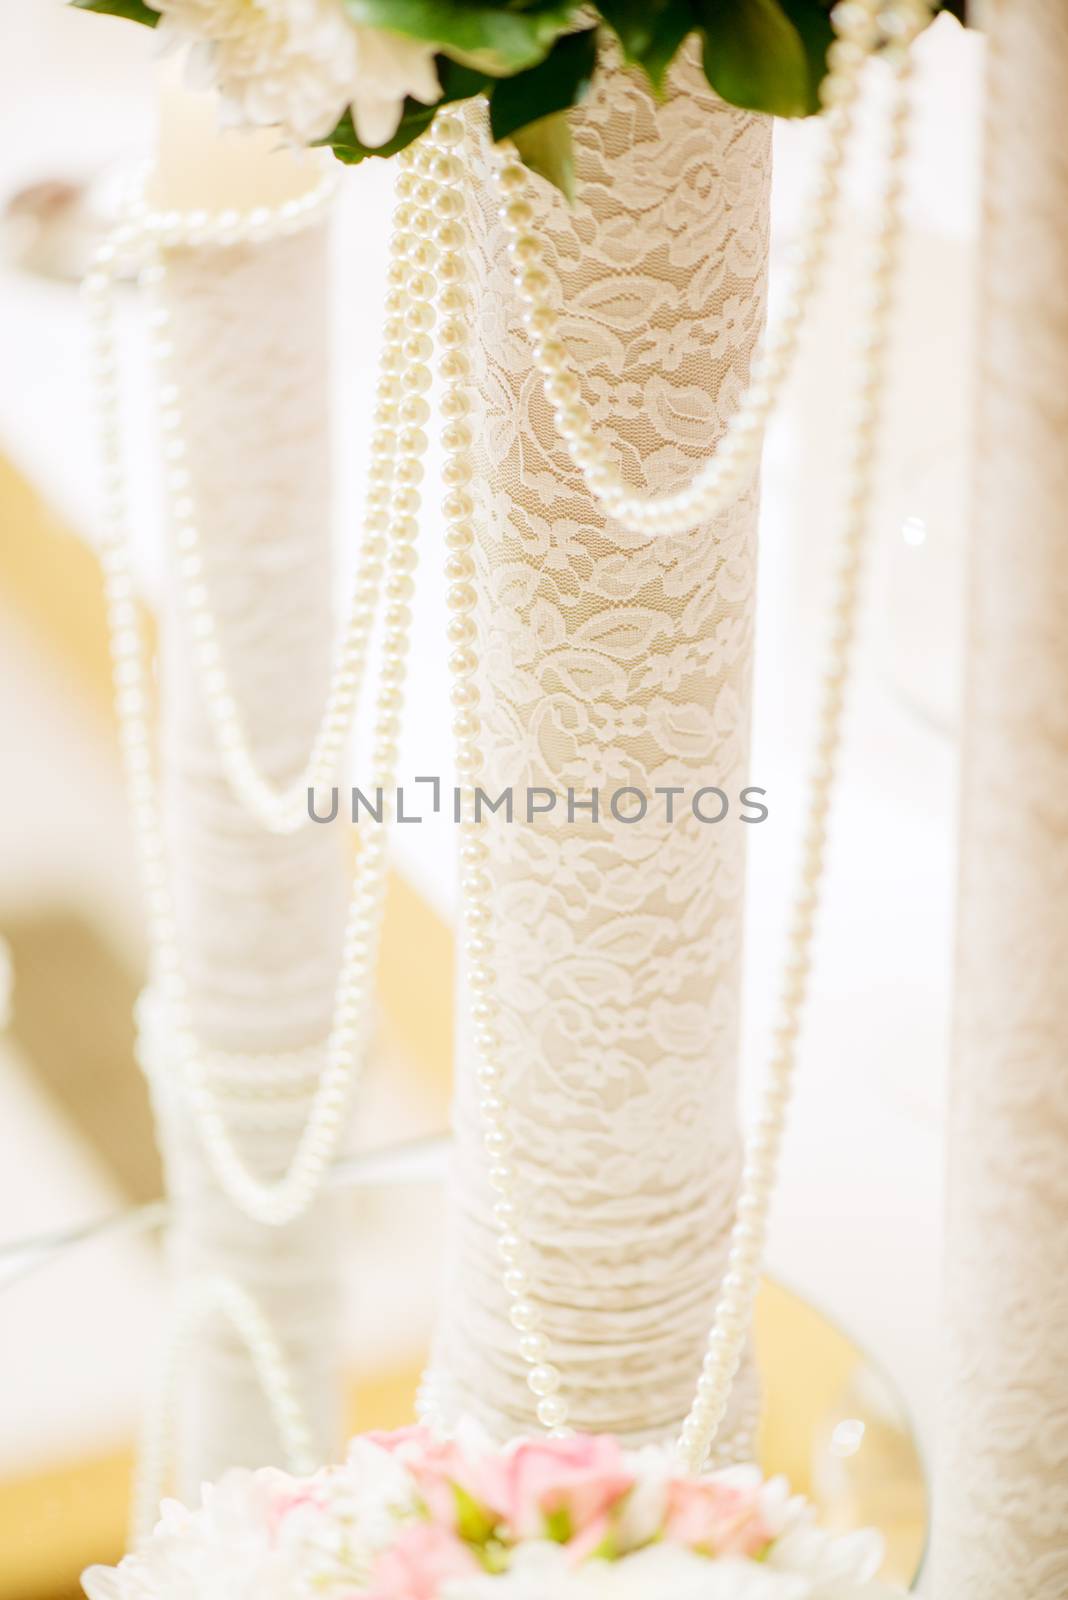 Wedding table decoration with pearls and lace